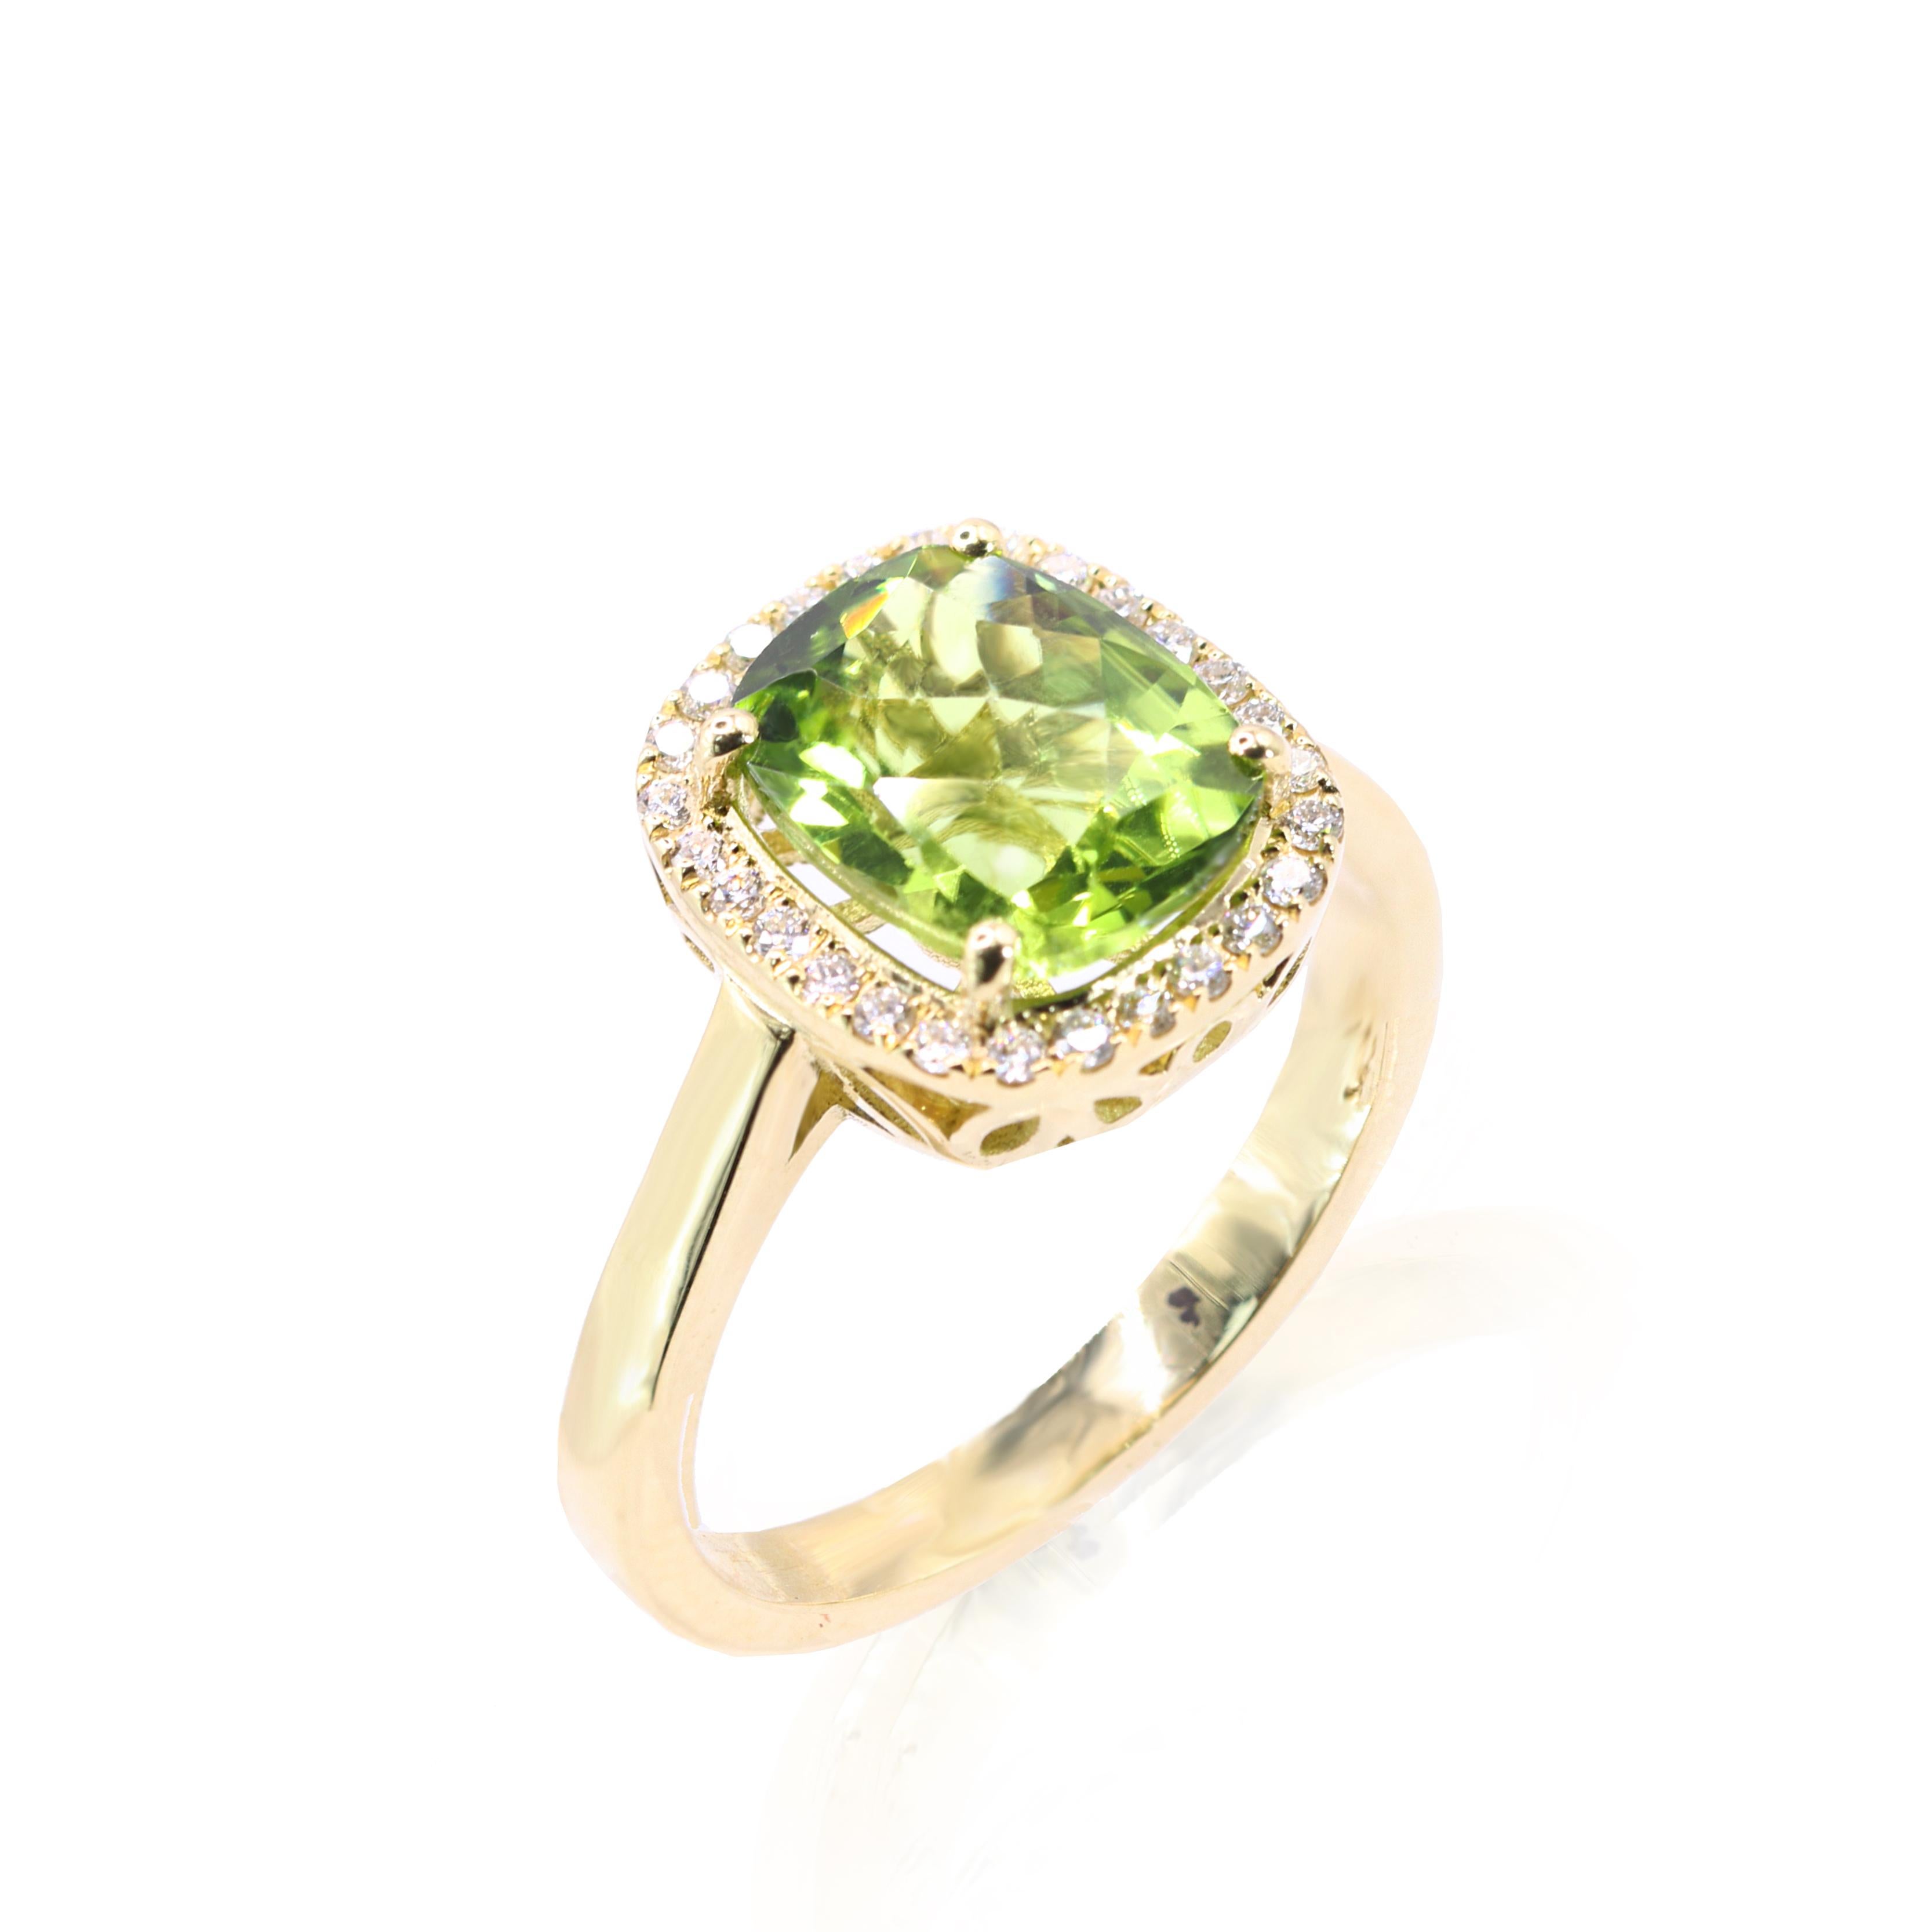 Georgios Collections 18 Karat Yellow Gold Peridot Ring with Diamond Bezel In New Condition For Sale In Astoria, NY